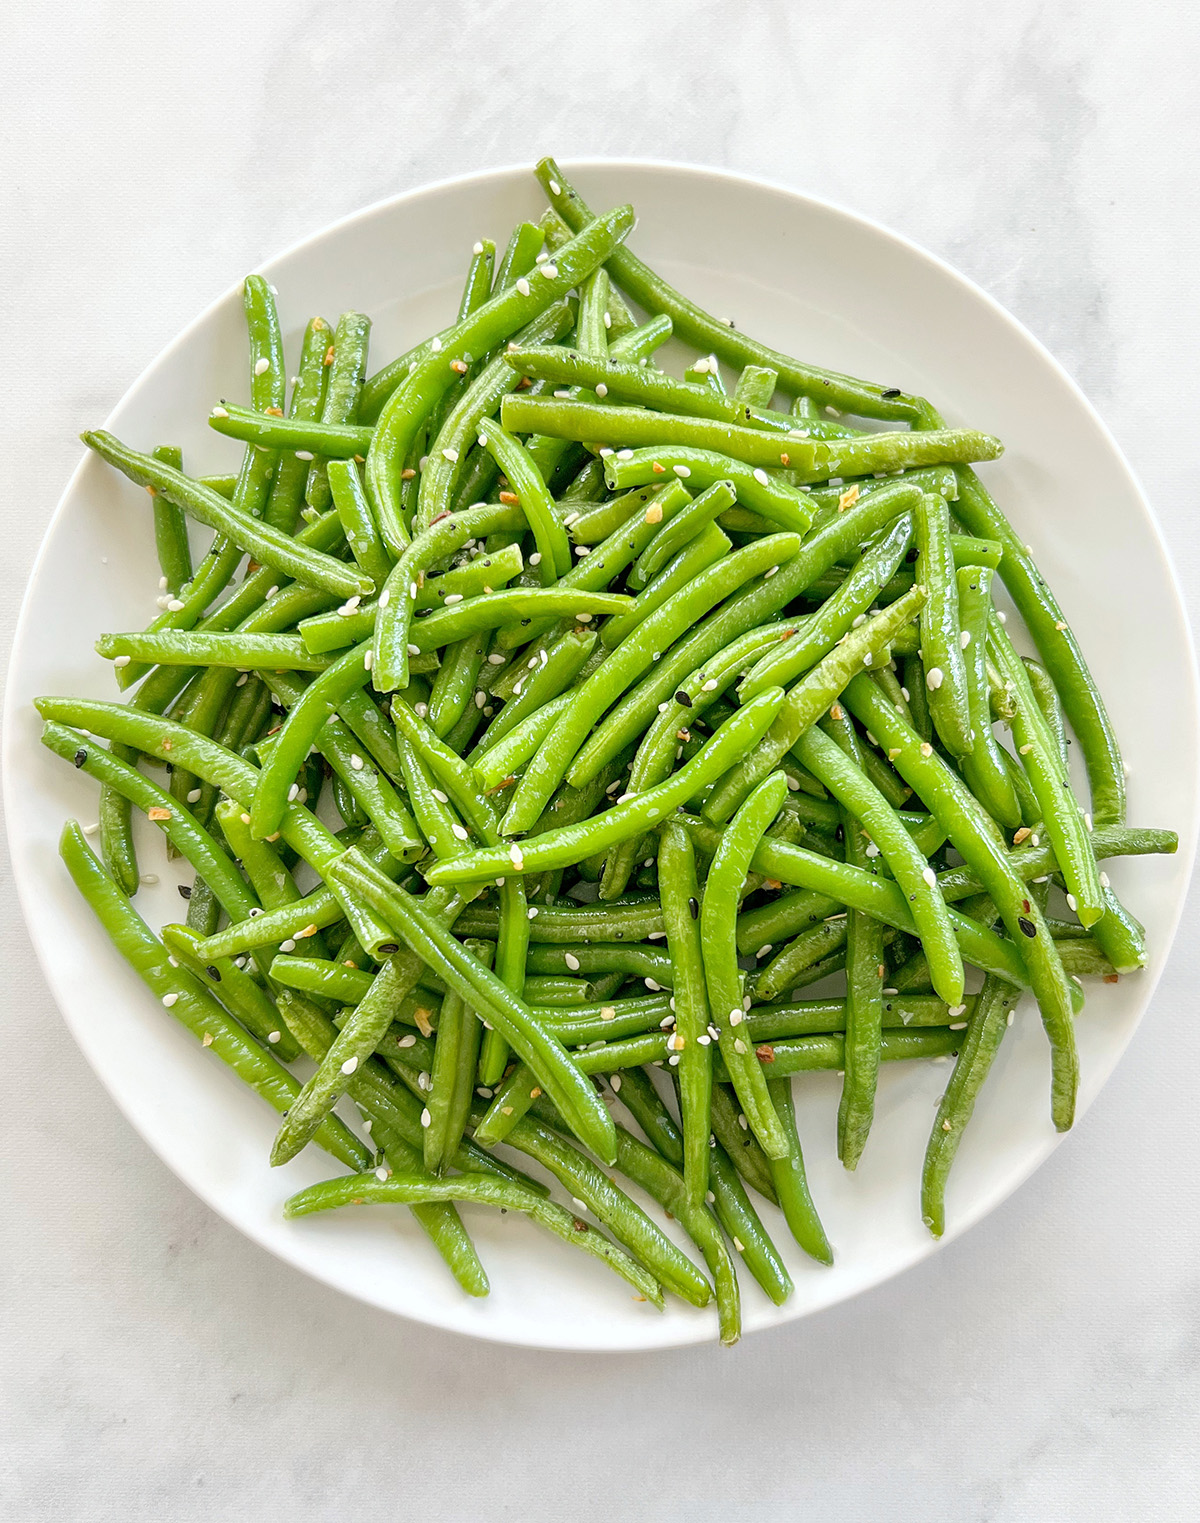 How To Cook: Frozen Green Beans - Easy, Tasty Recipe 